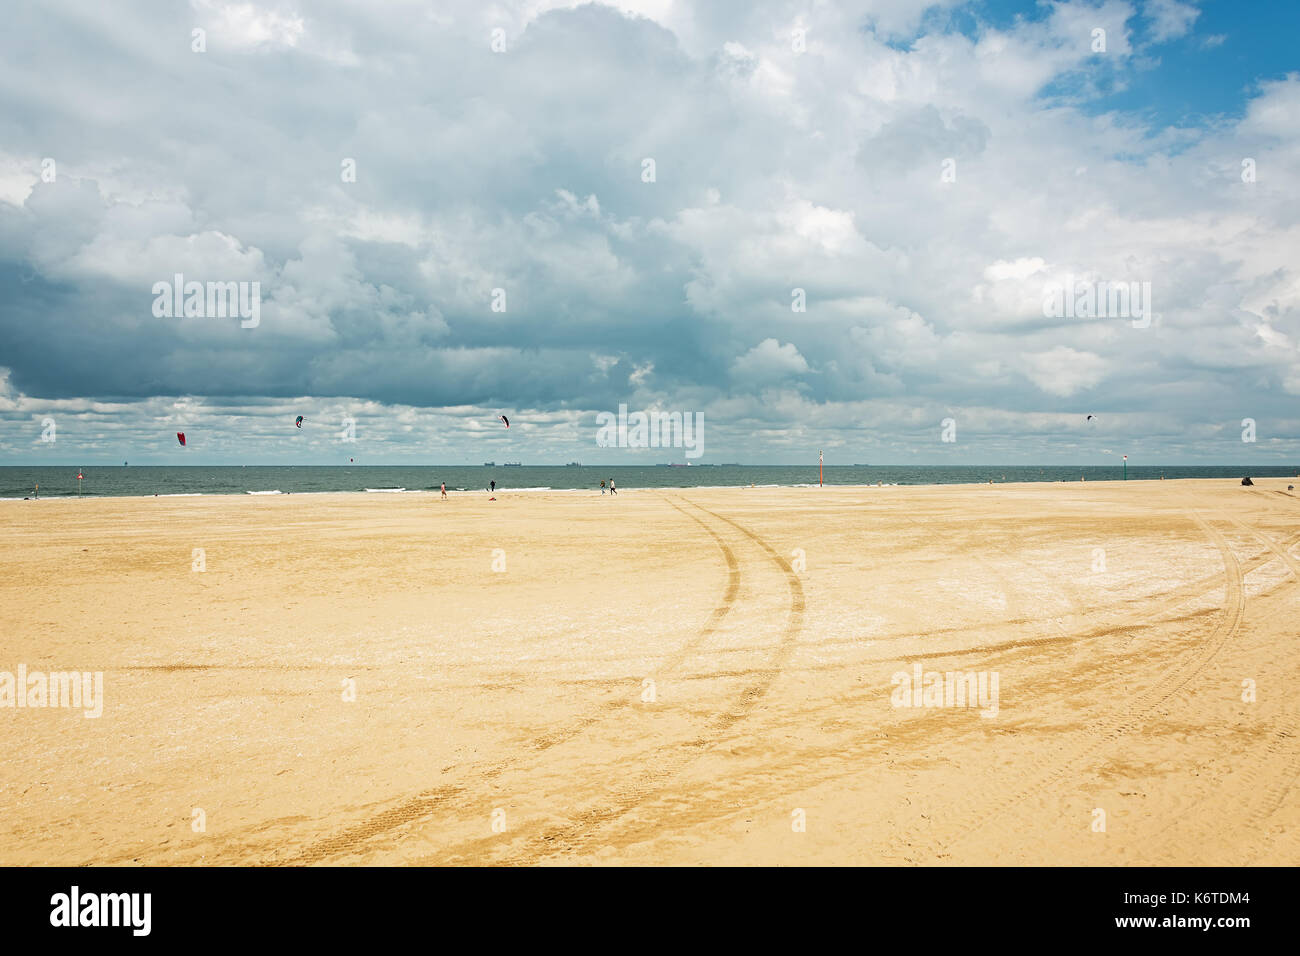 Kytesurfers on the beach of Scheveningen with in the background the seagoing ships at anchor waiting to enter the port of Rotterdam in The Netherlands Stock Photo